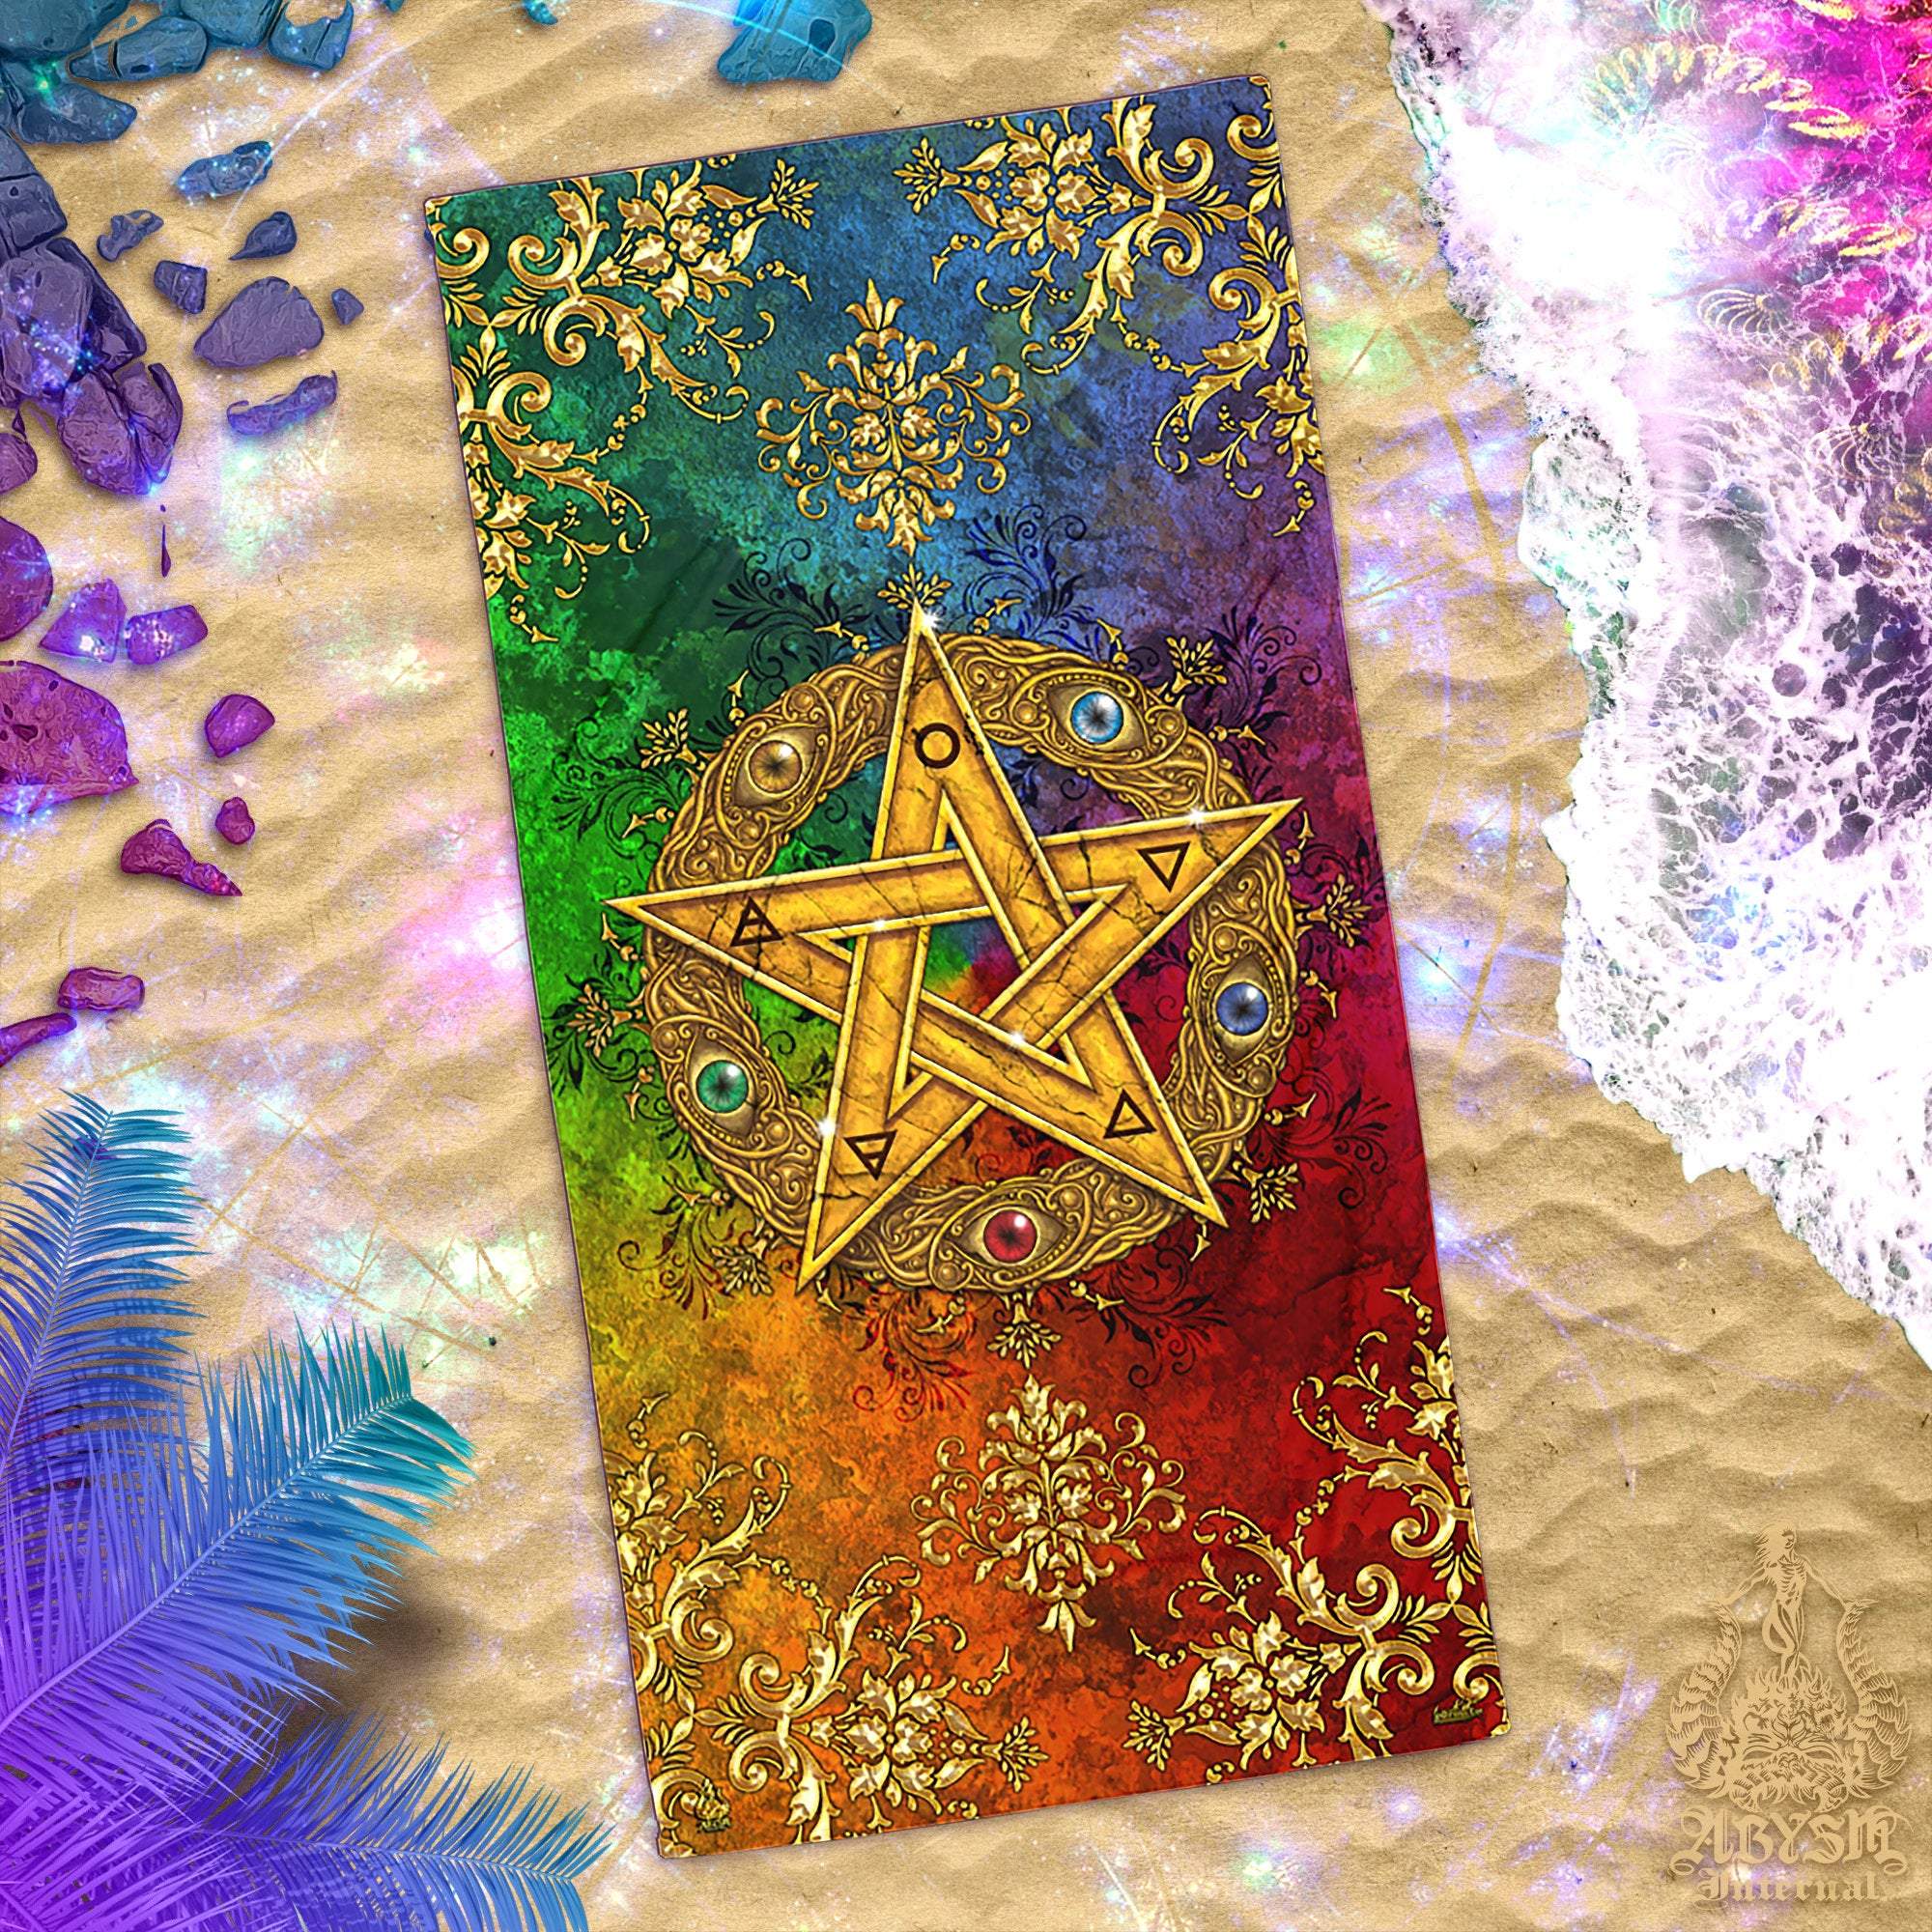 Pentacle Beach Towel, Wiccan Witch and Pagan - Gold - Abysm Internal